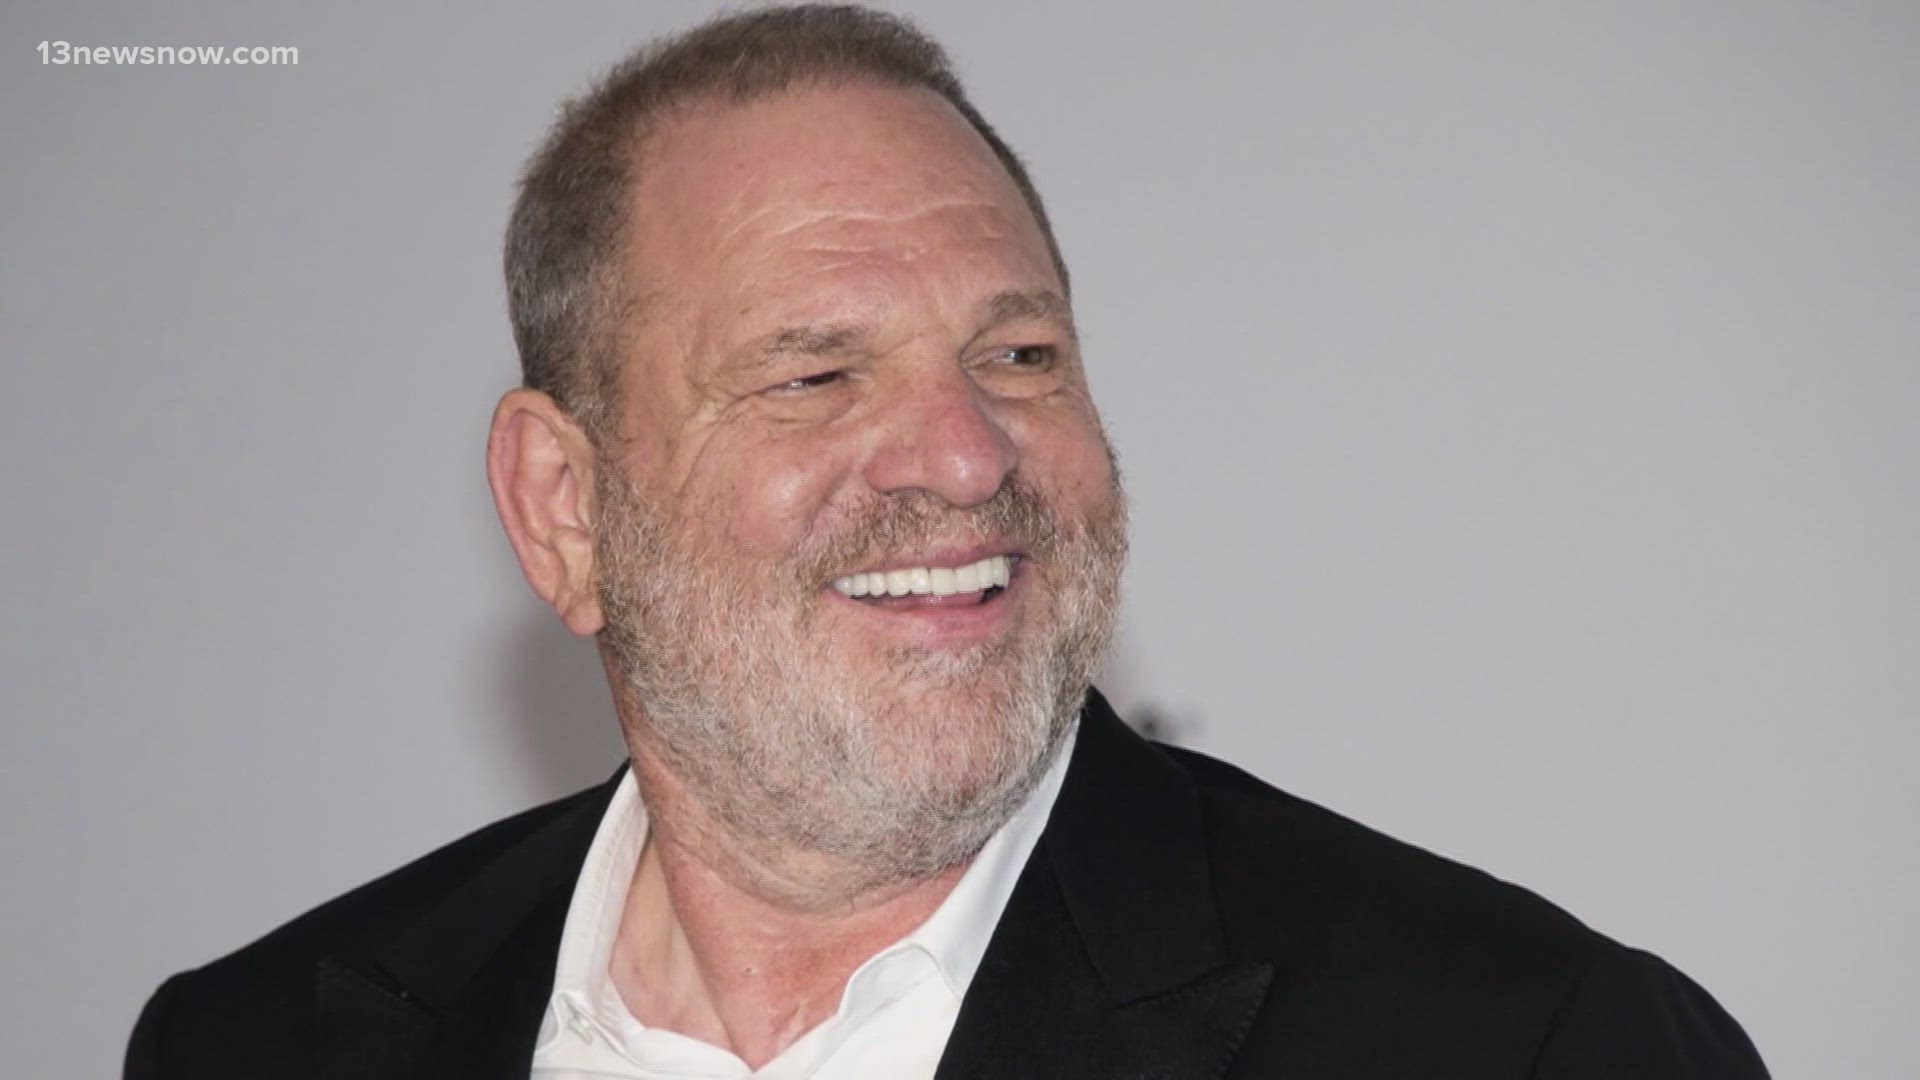 The court of appeals decided the evidence of uncharged crimes allowed at trial "was unnecessary" to establish Weinstein's intent.